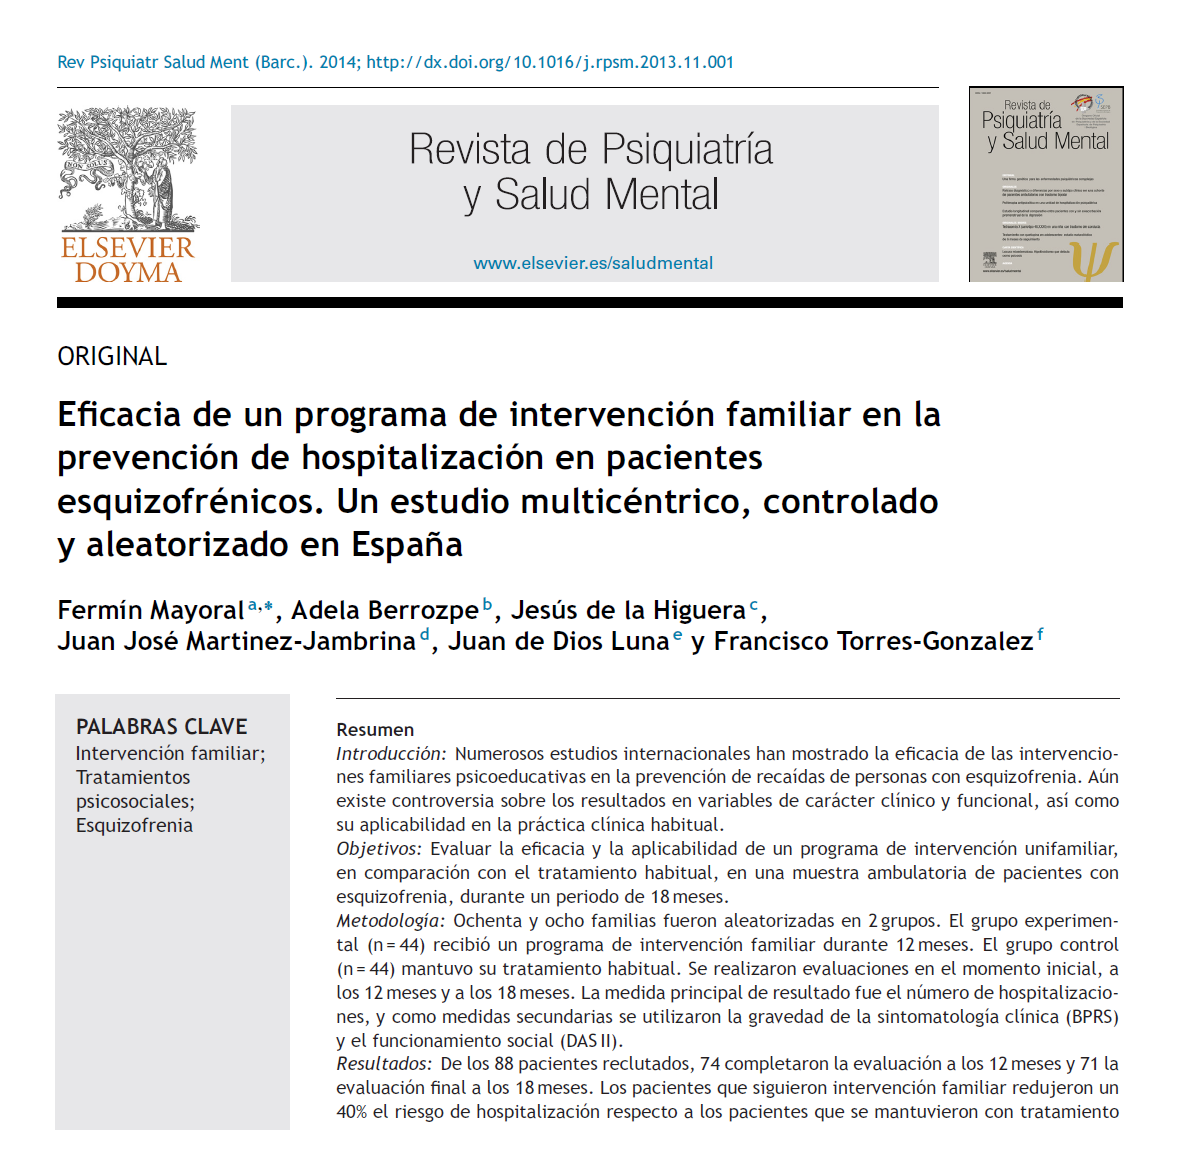 http://apps.elsevier.es/watermark/ctl_servlet?_f=10&pident_articulo=0&pident_usuario=0&pcontactid=&pident_revista=286&ty=0&accion=L&origen=zonadelectura&web=zl.elsevier.es&lan=es&fichero=S1888-9891(13)00124-9.pdf&eop=1&early=si